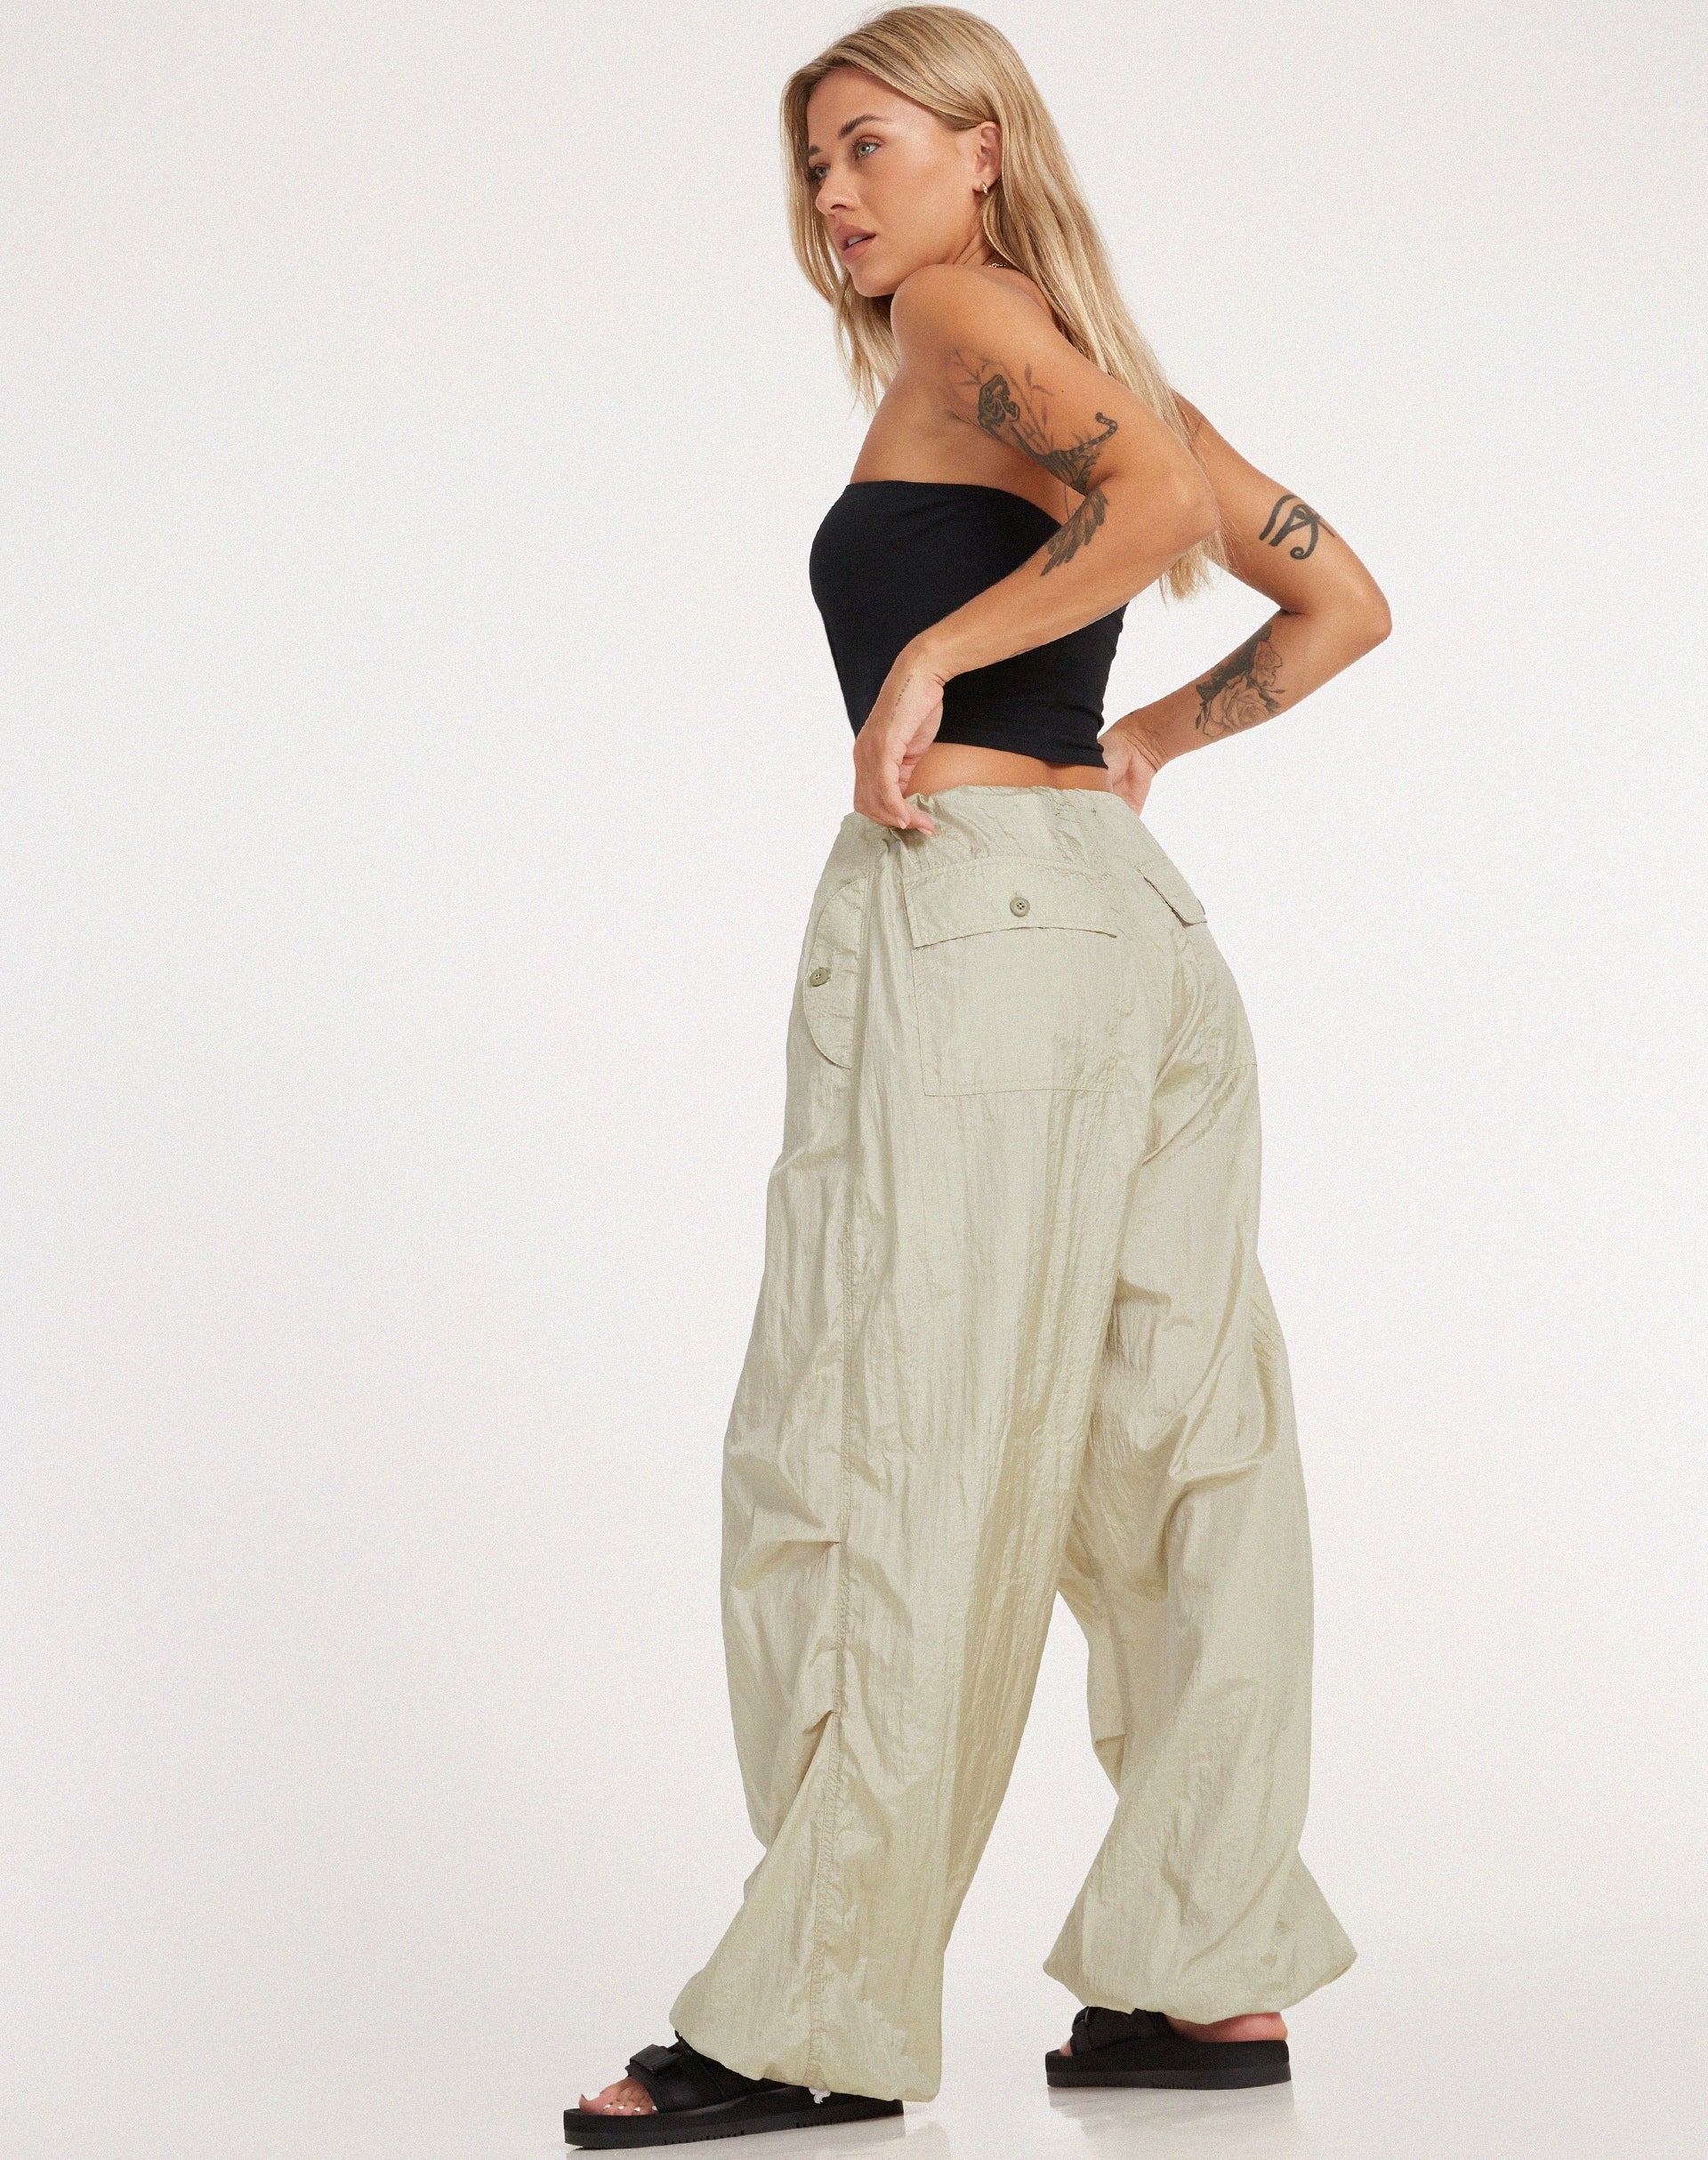 Image of Chute Trouser in Parachute Almond Milk